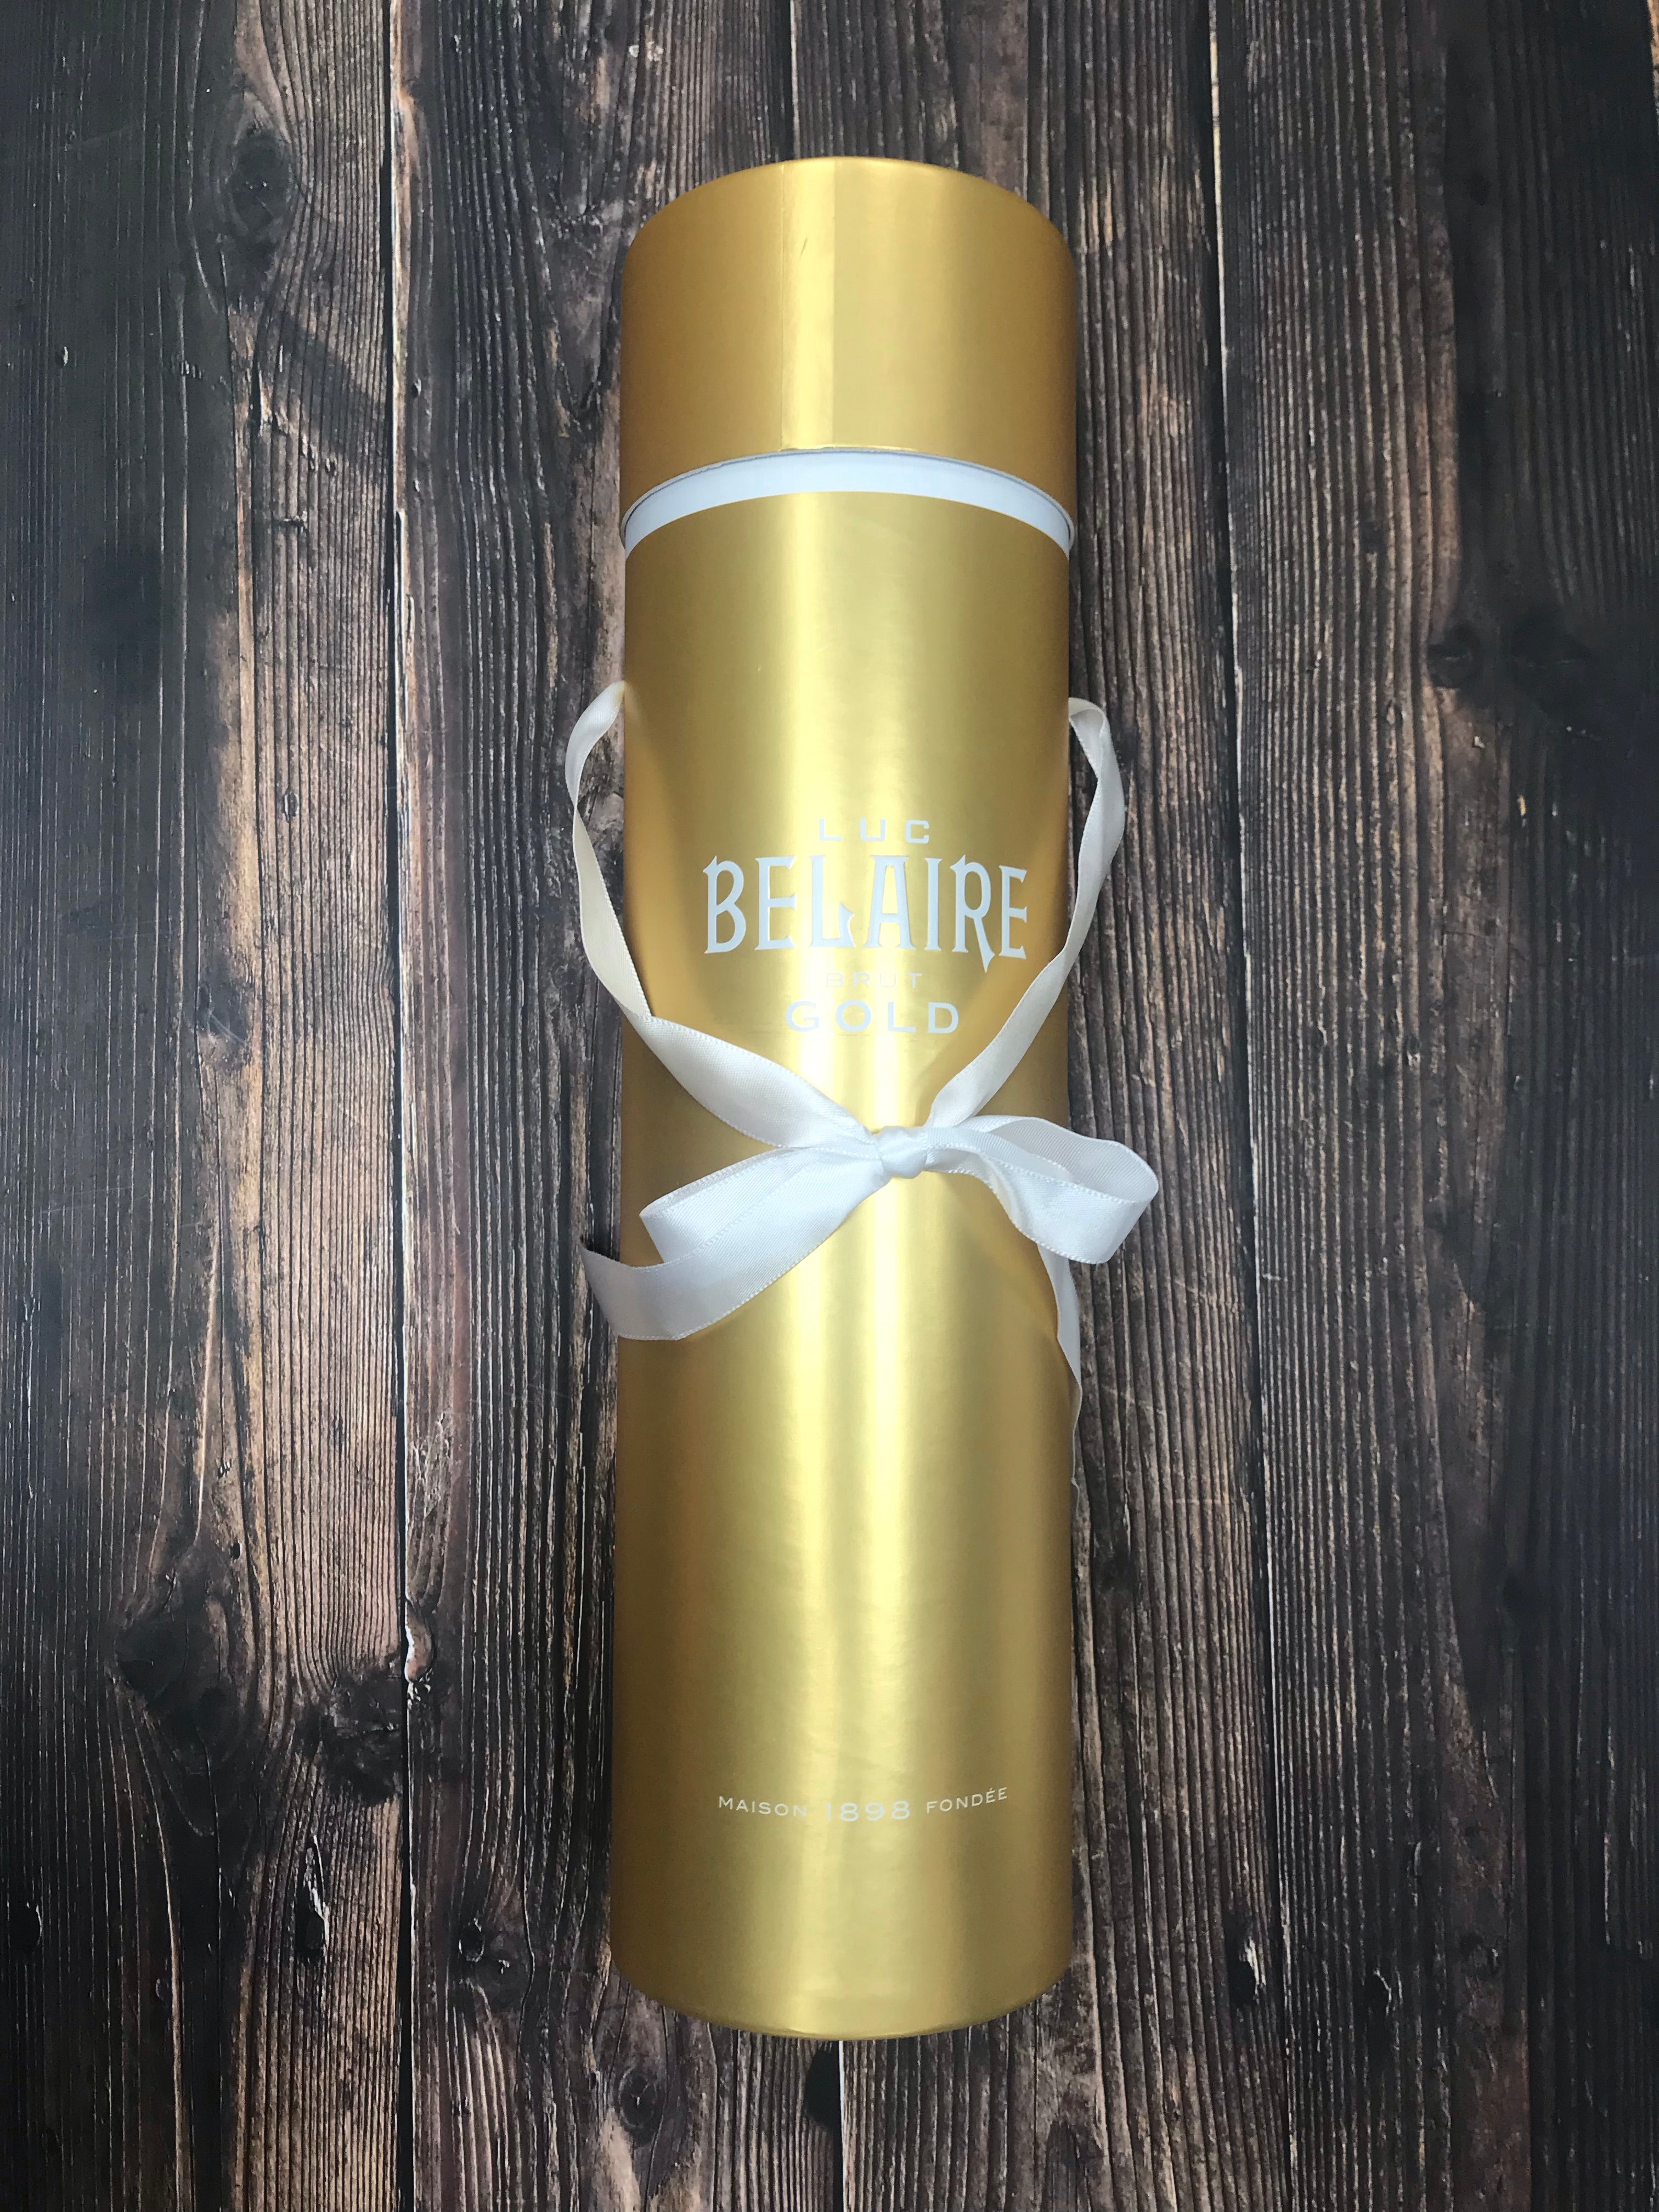 Belaire Luc Brut Gold Champagne (Gift Box Edition) – 3brothersliquor